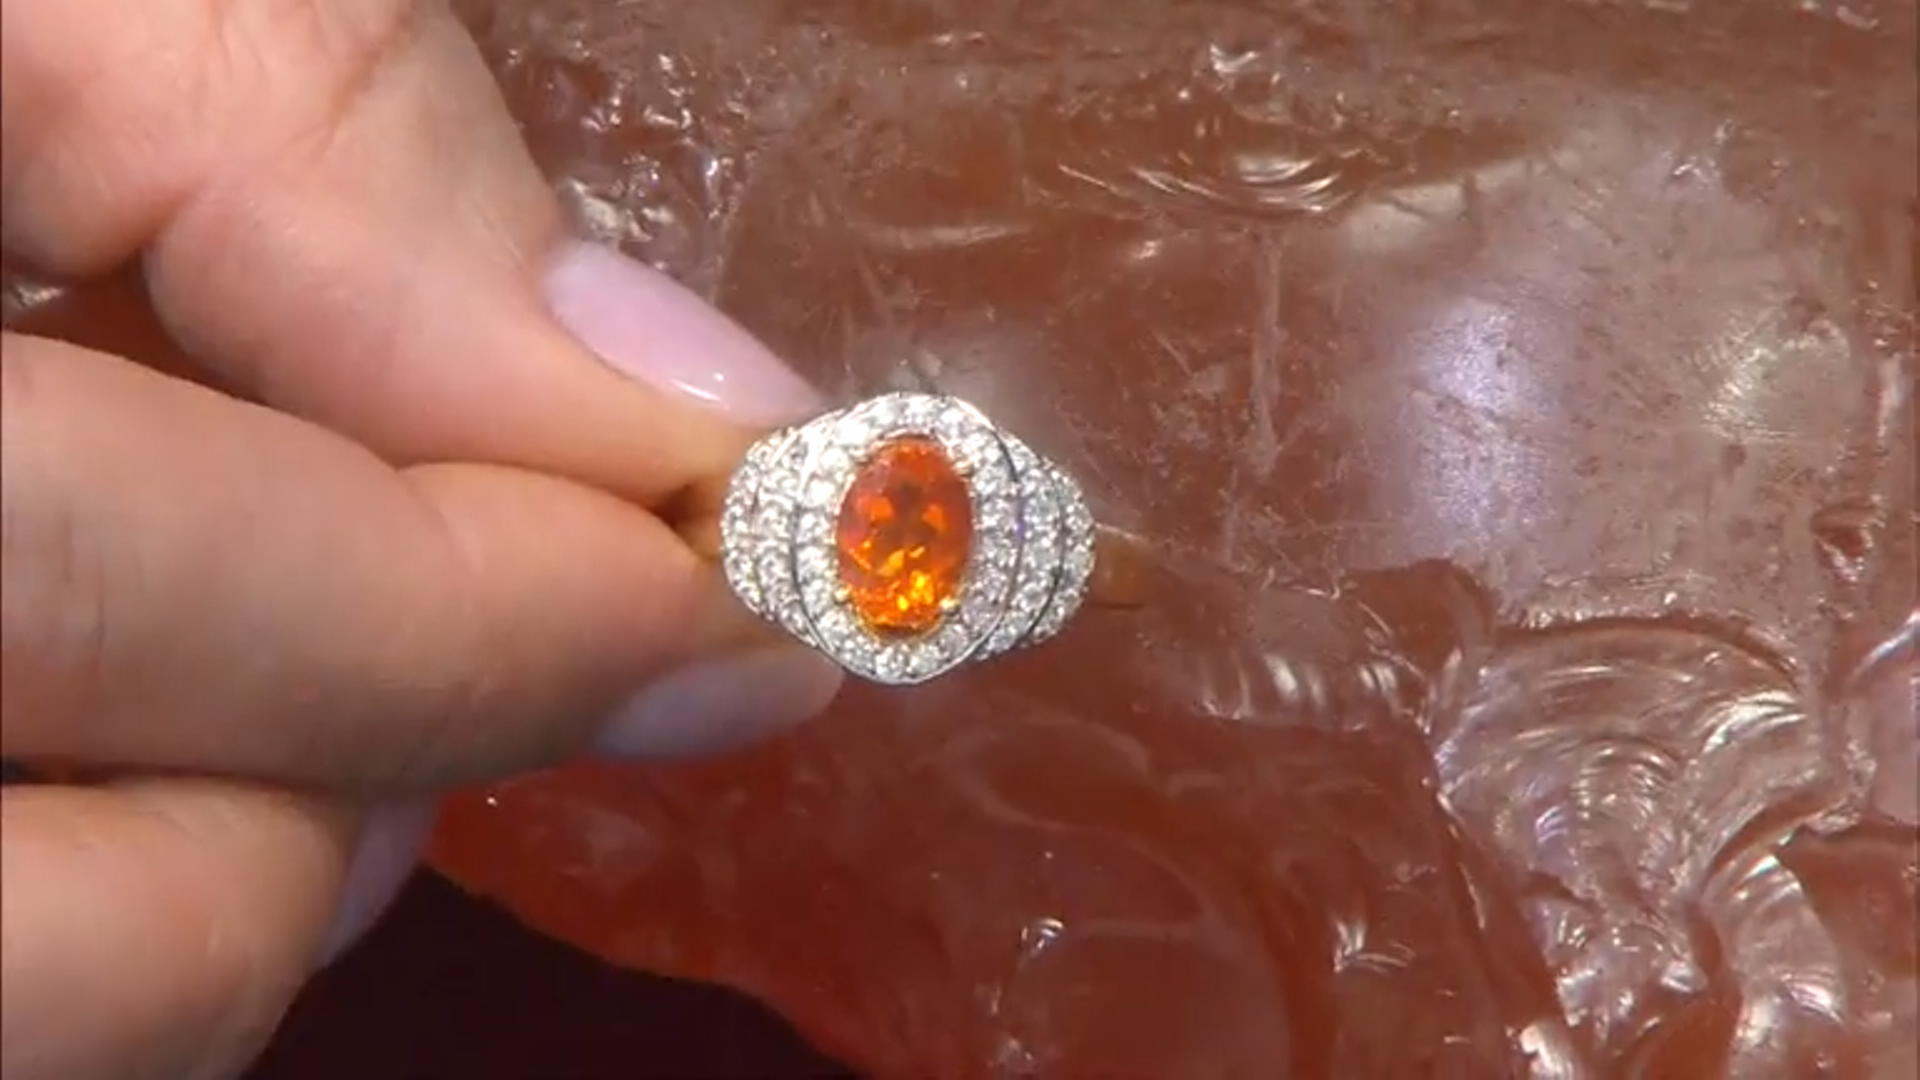 Oval Mexican Fire Opal 14k Yellow Gold Over Sterling Silver Ring 1.10ctw Video Thumbnail